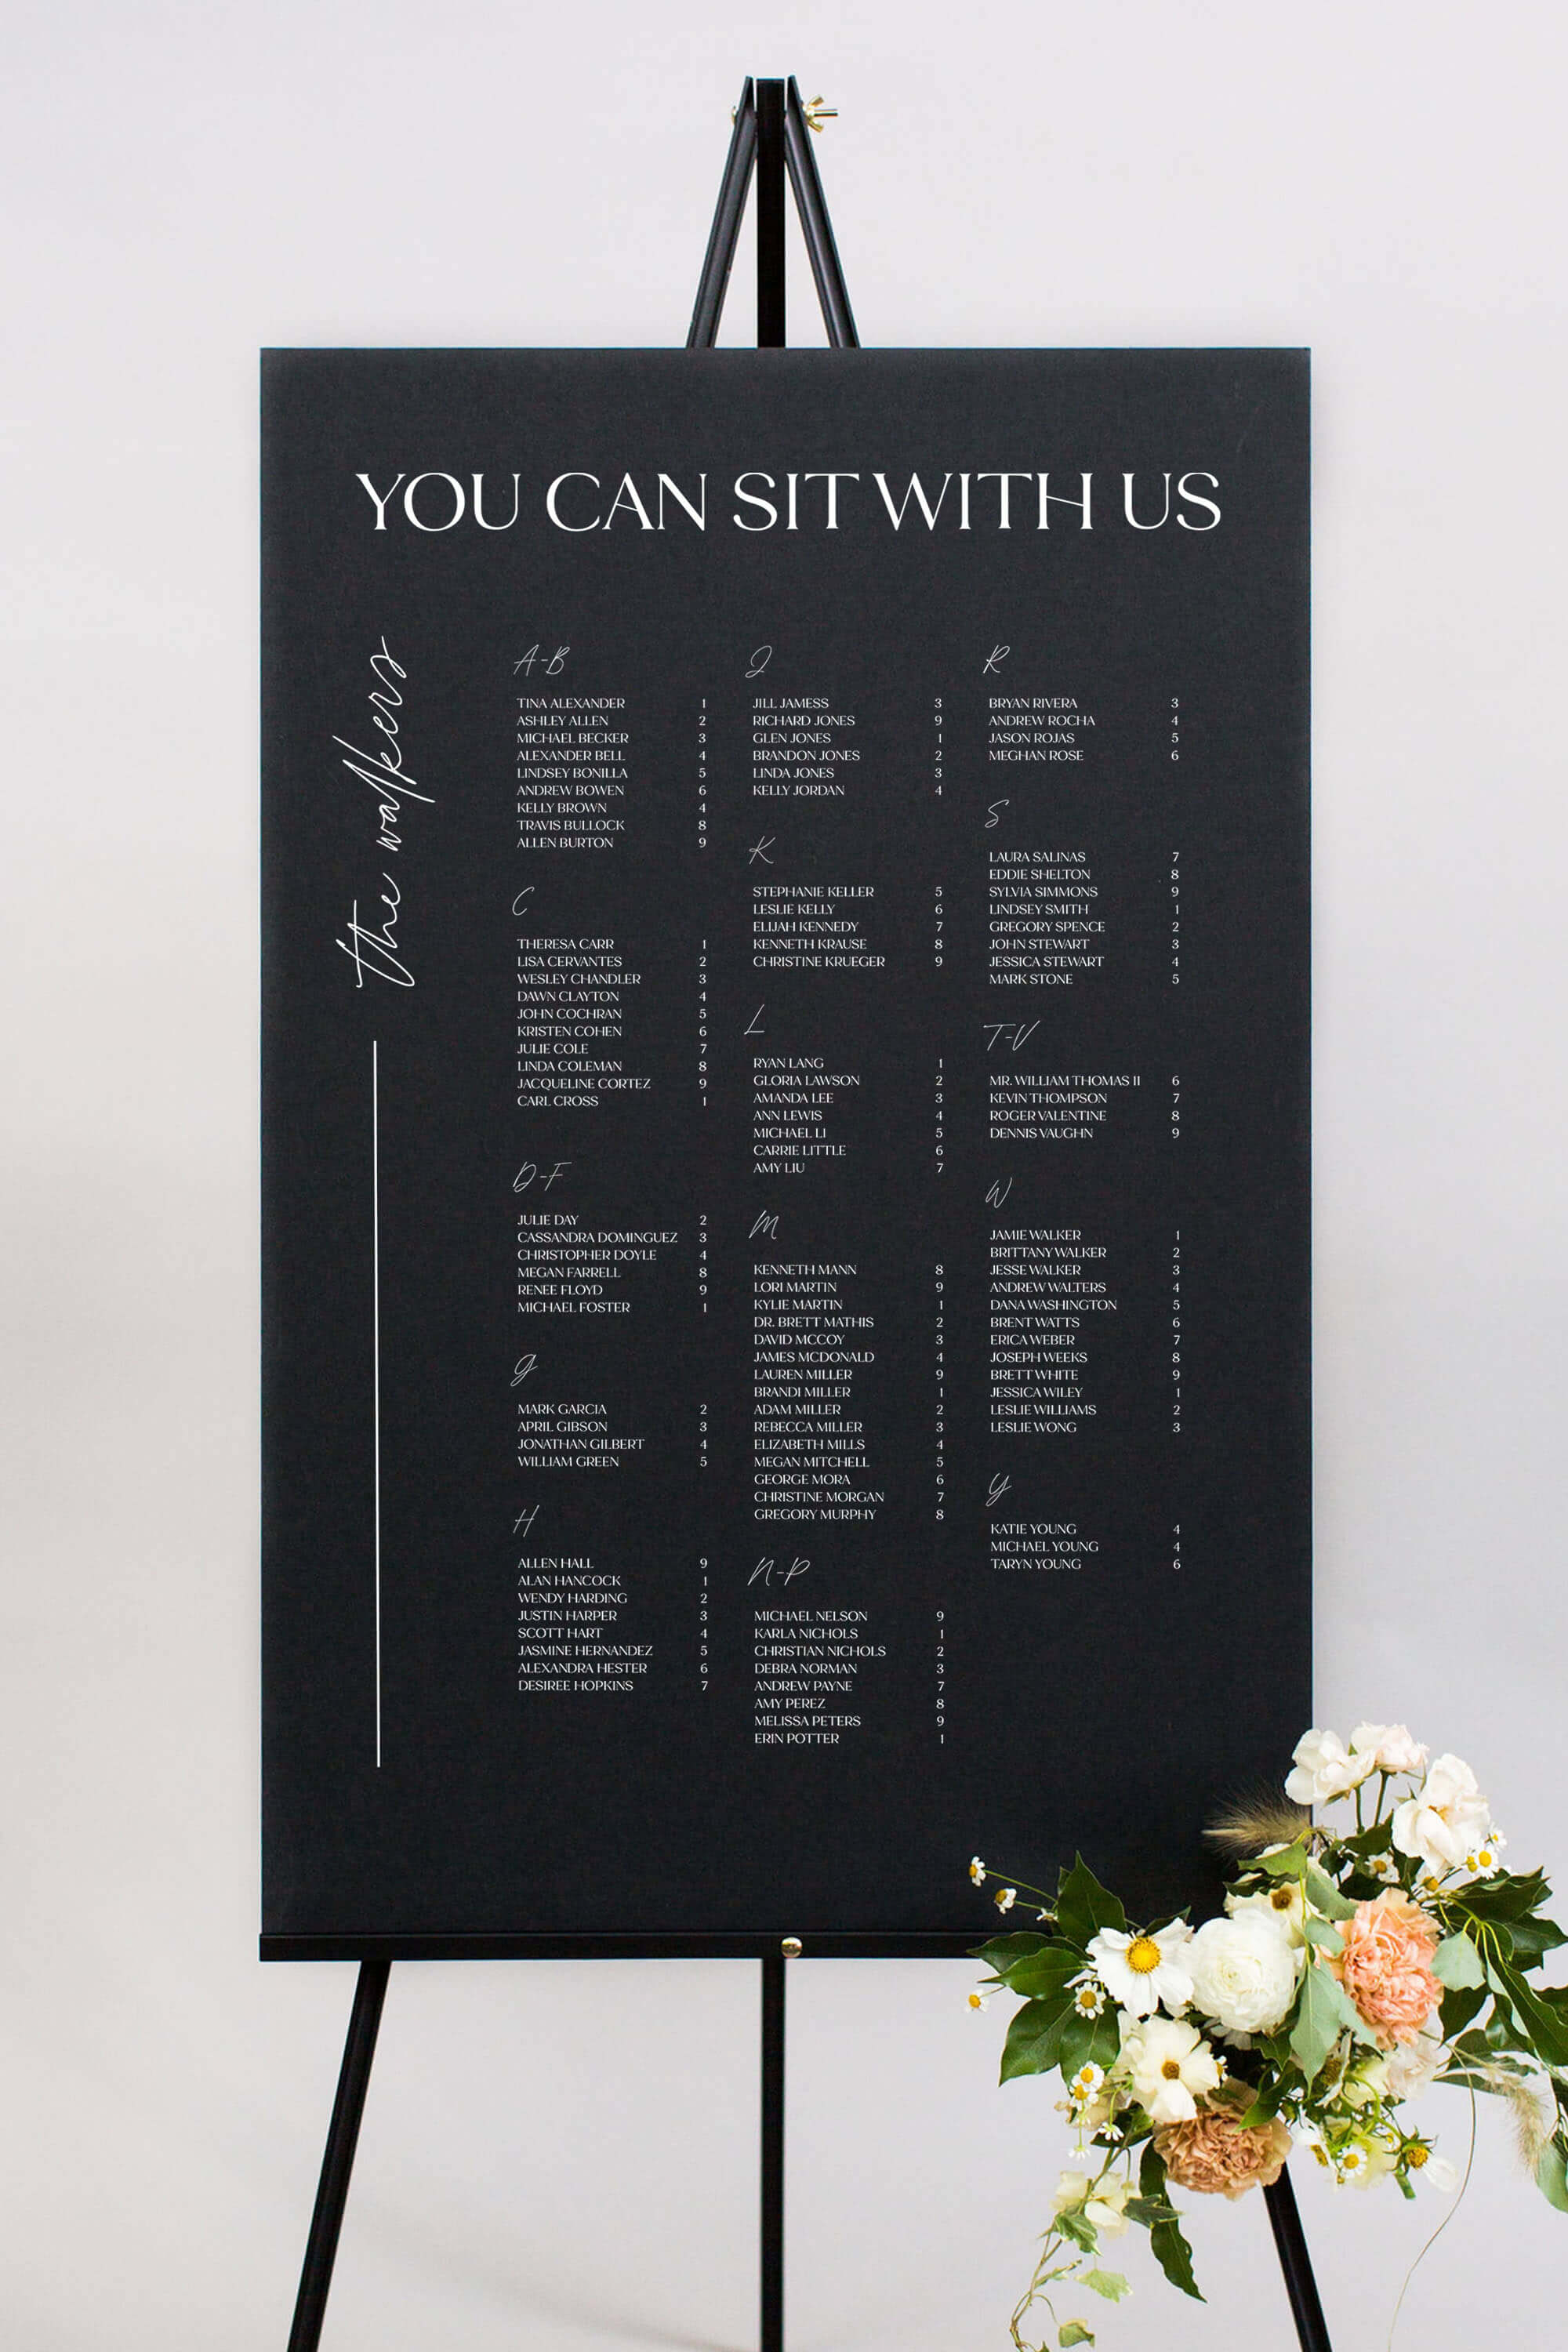 Find Your Name, Take Your Seat, Bon Appetit Wedding Seating Sign – Rich  Design Co